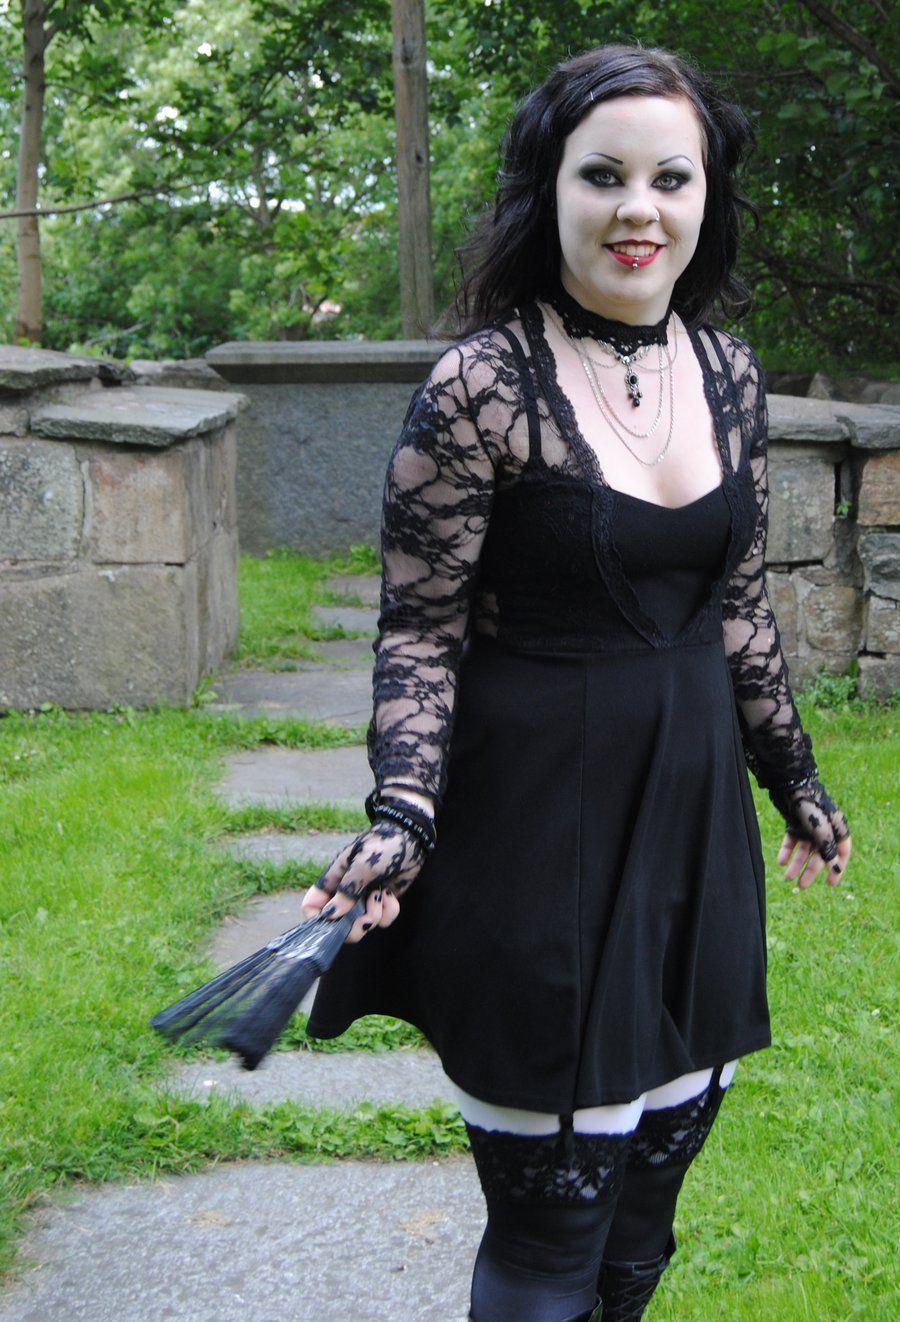 Crunchie reccomend Busty young goth